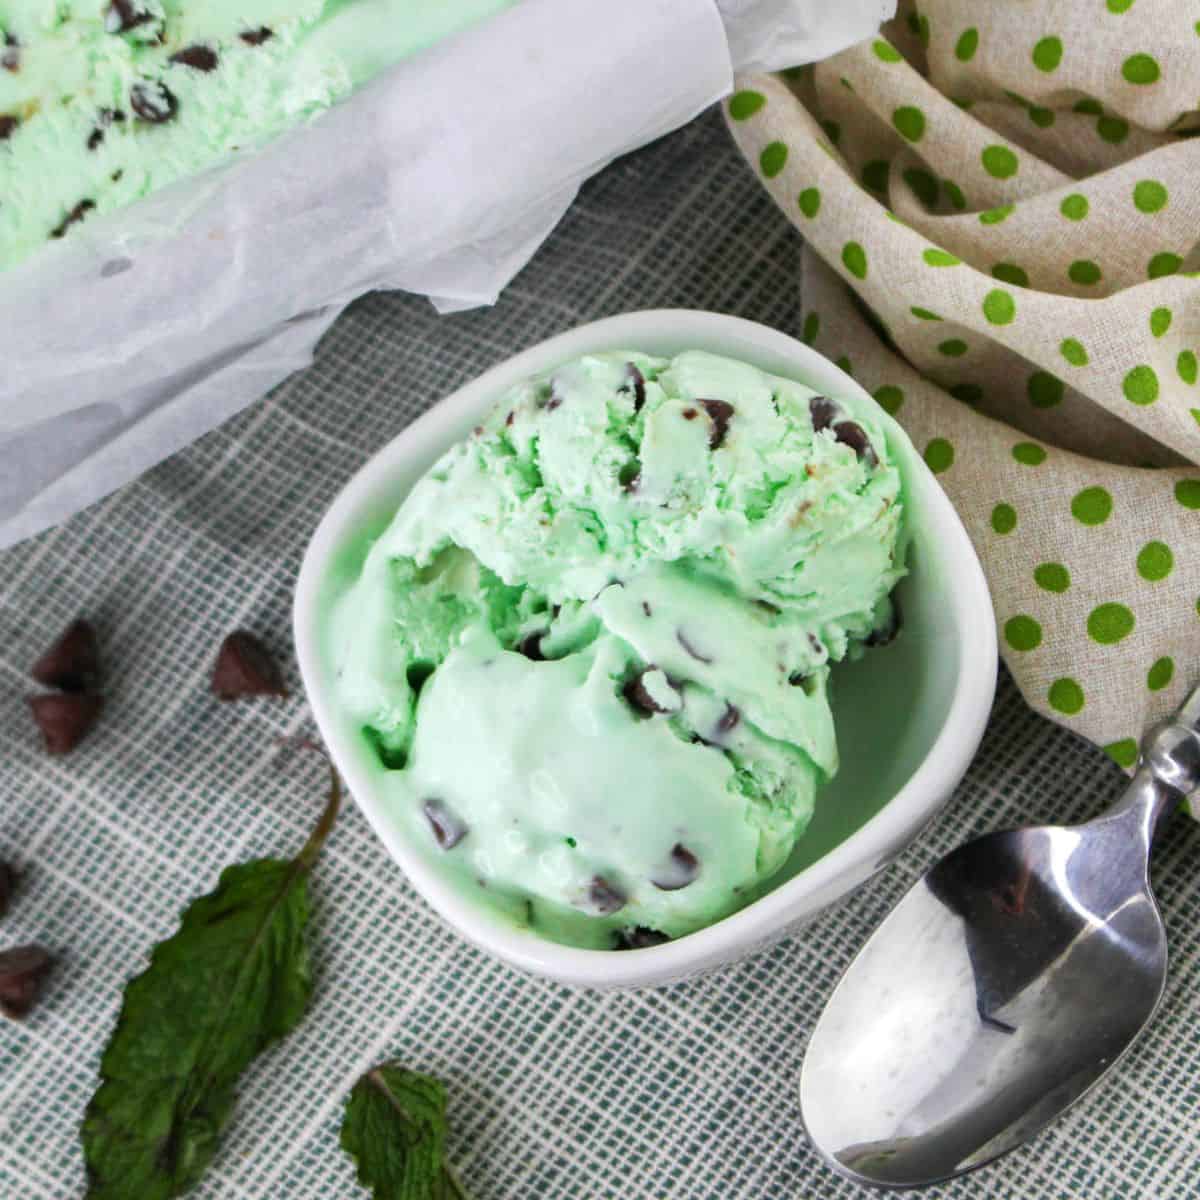 No churn grasshopper ice cream in a bowl with mint leaves on the side.